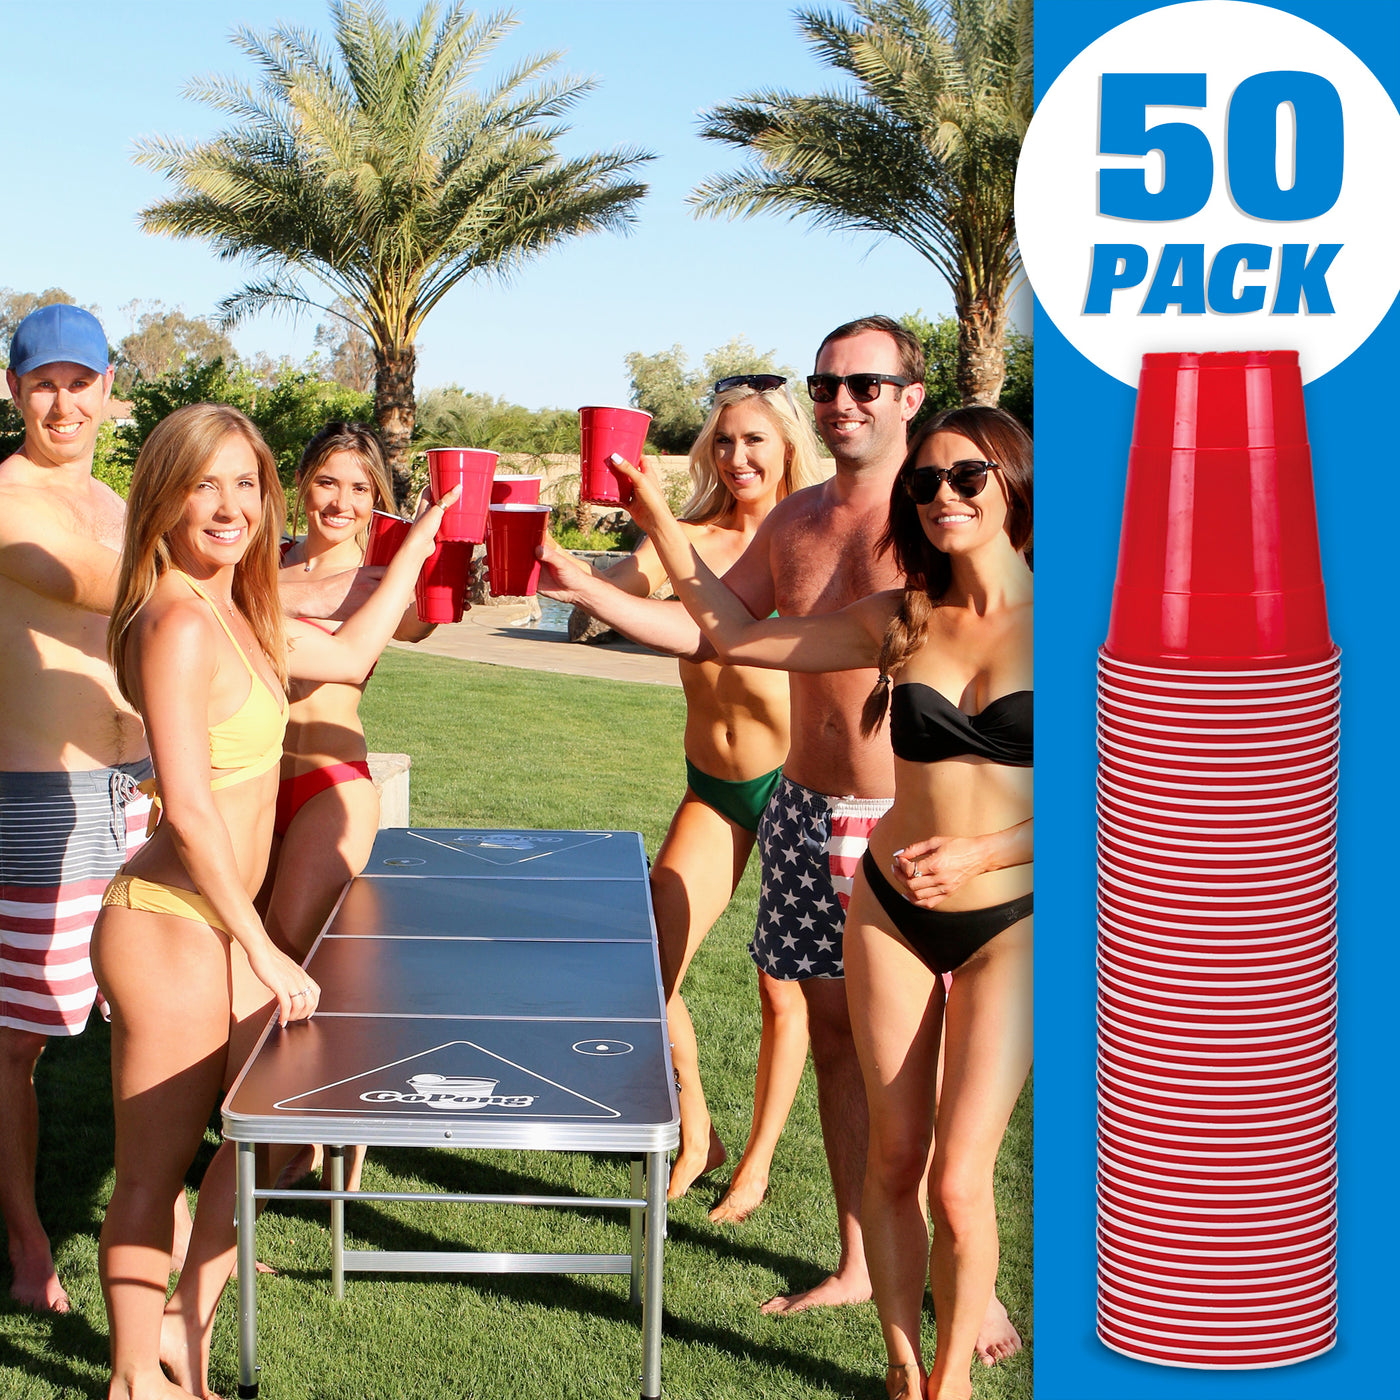 GoPong 6oz Red Party Cups 160 Pack - Great for Parties, Tasting Flights and  Games,6 Oz(Pack of 160)